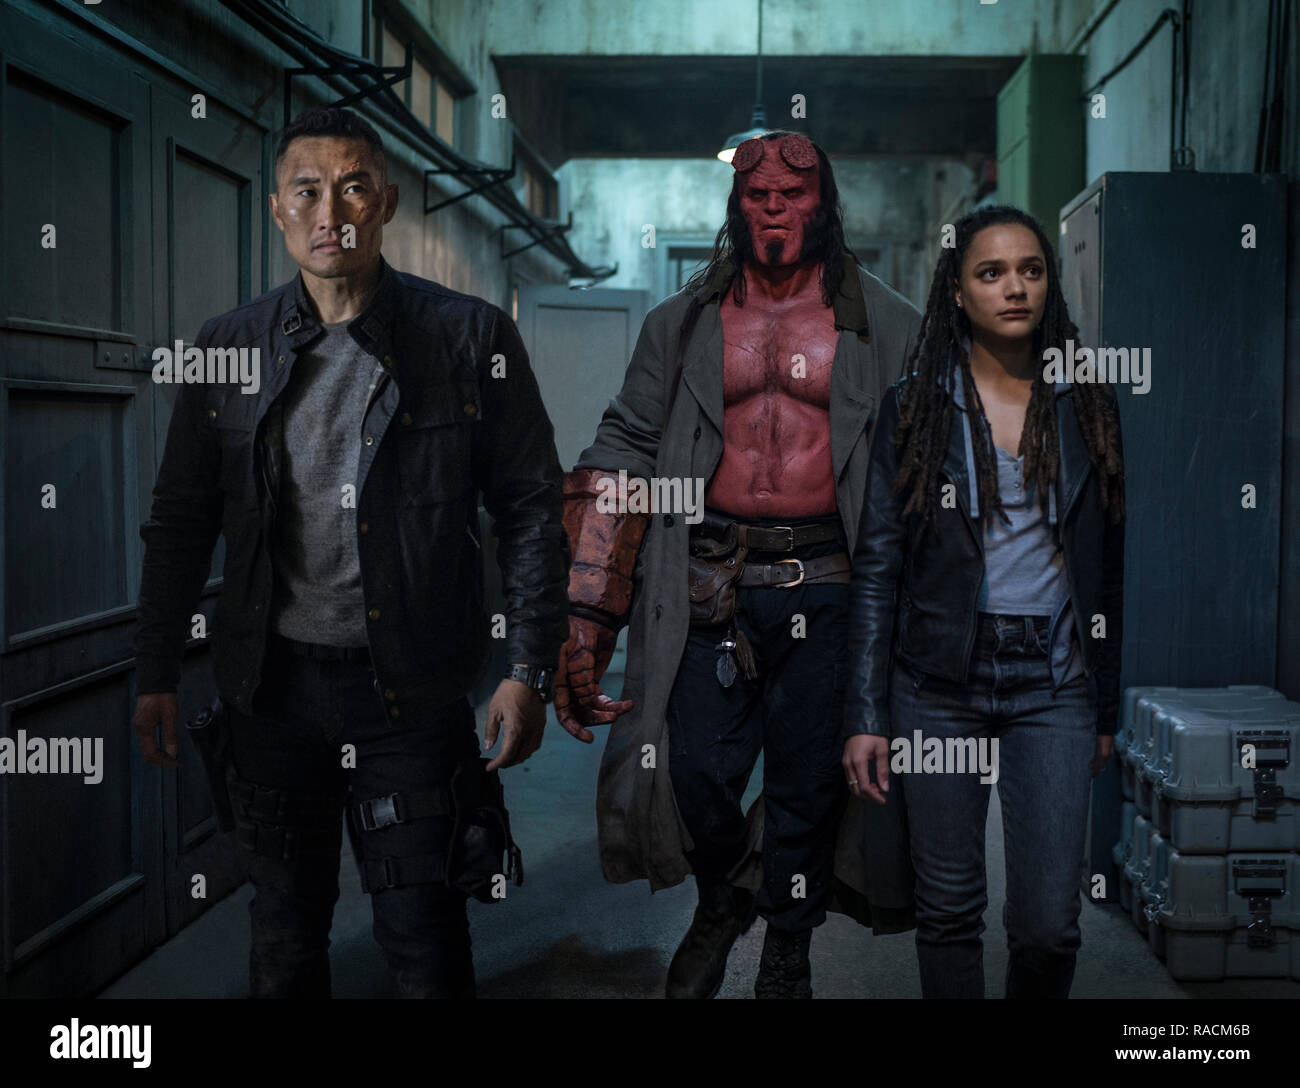 RELEASE DATE: April 12, 2019 TITLE: Hellboy STUDIO: Summit Entertainment DIRECTOR: Neil Marshall PLOT: Based on the graphic novels by Mike Mignola, Hellboy, caught between the worlds of the supernatural and human, battles an ancient sorceress bent on revenge. STARRING: DANIEL DAE KIM as Ben Daimio, DAVID HARBOUR as Hellboy, SASHA LANE as Alice Monaghan. (Credit Image: © Summit Entertainment/Entertainment Pictures) Stock Photo